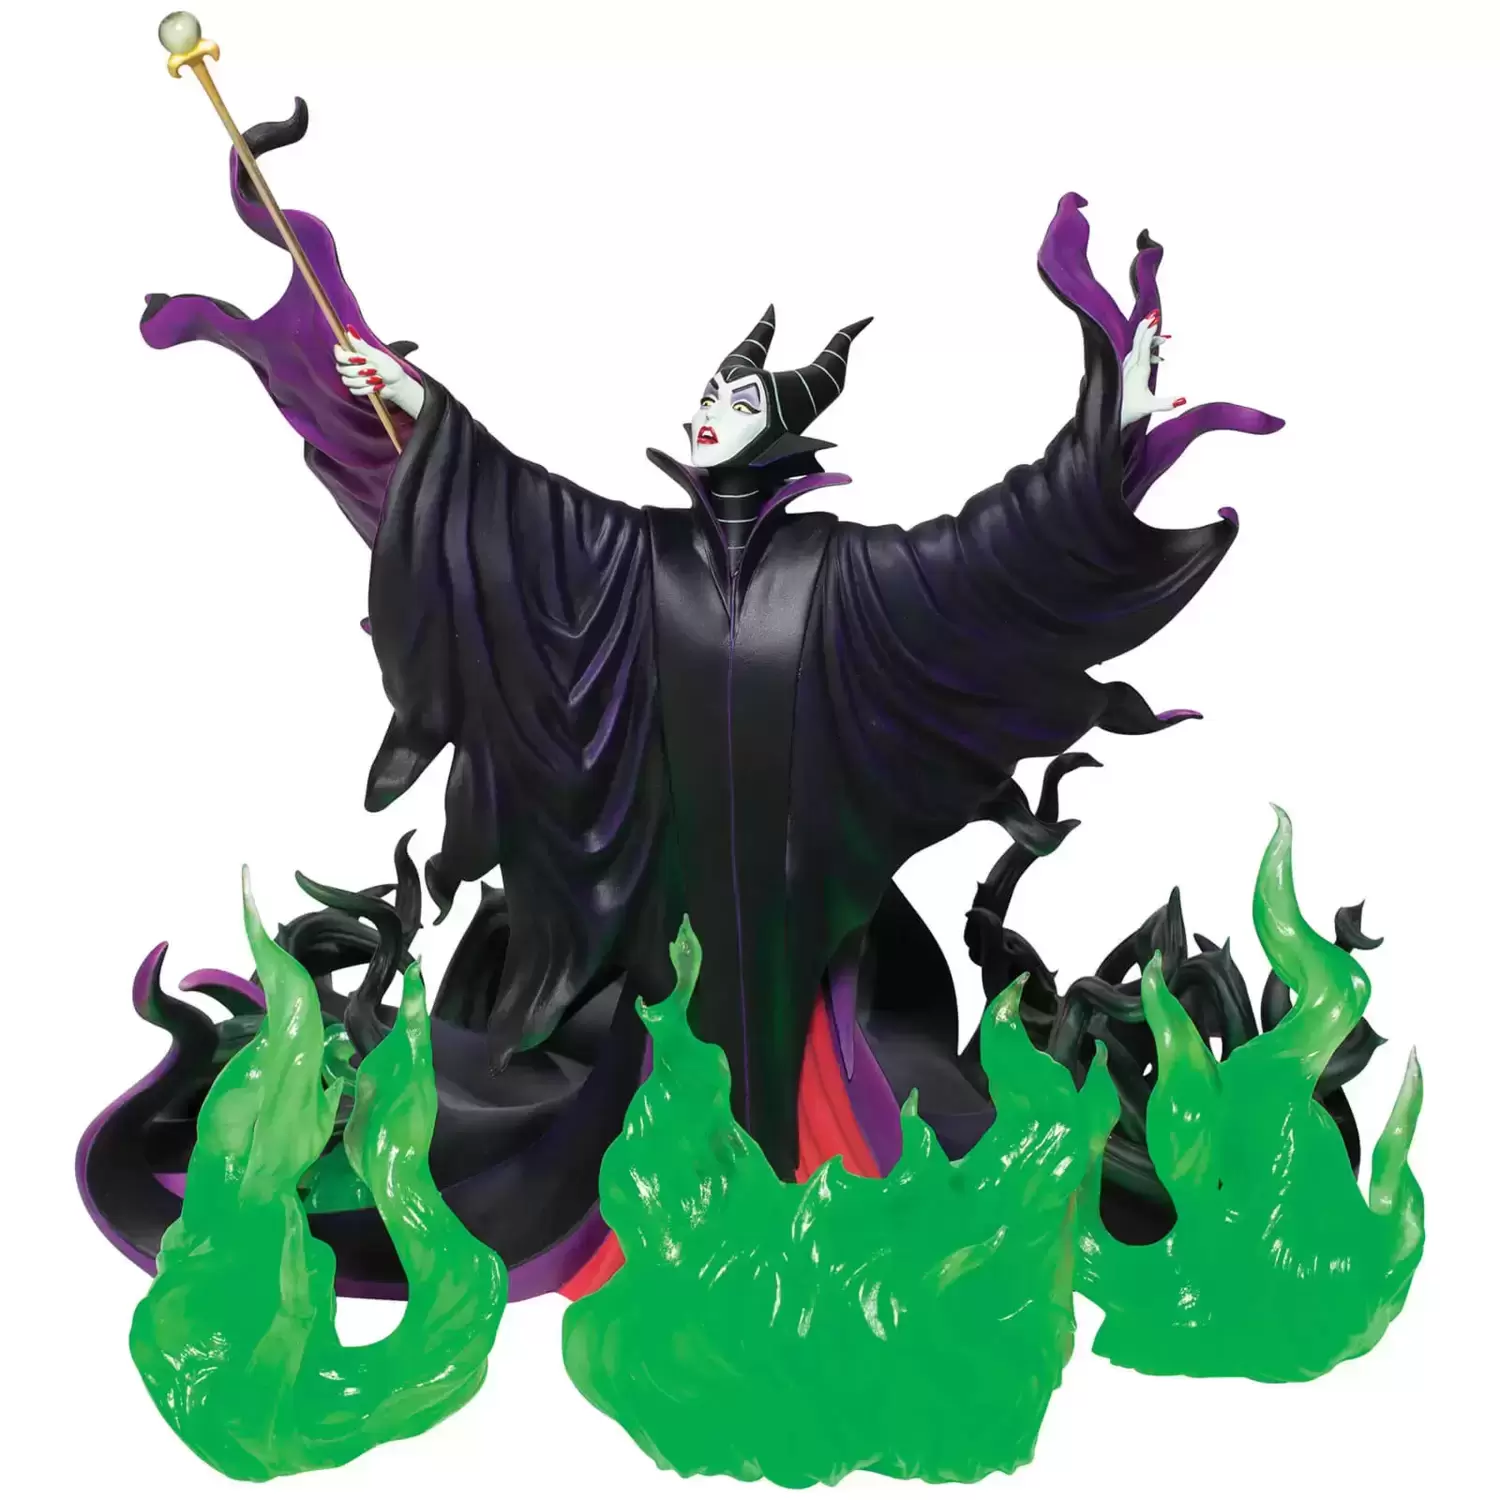 Grand Jester Studios - Maleficent Limited Edition